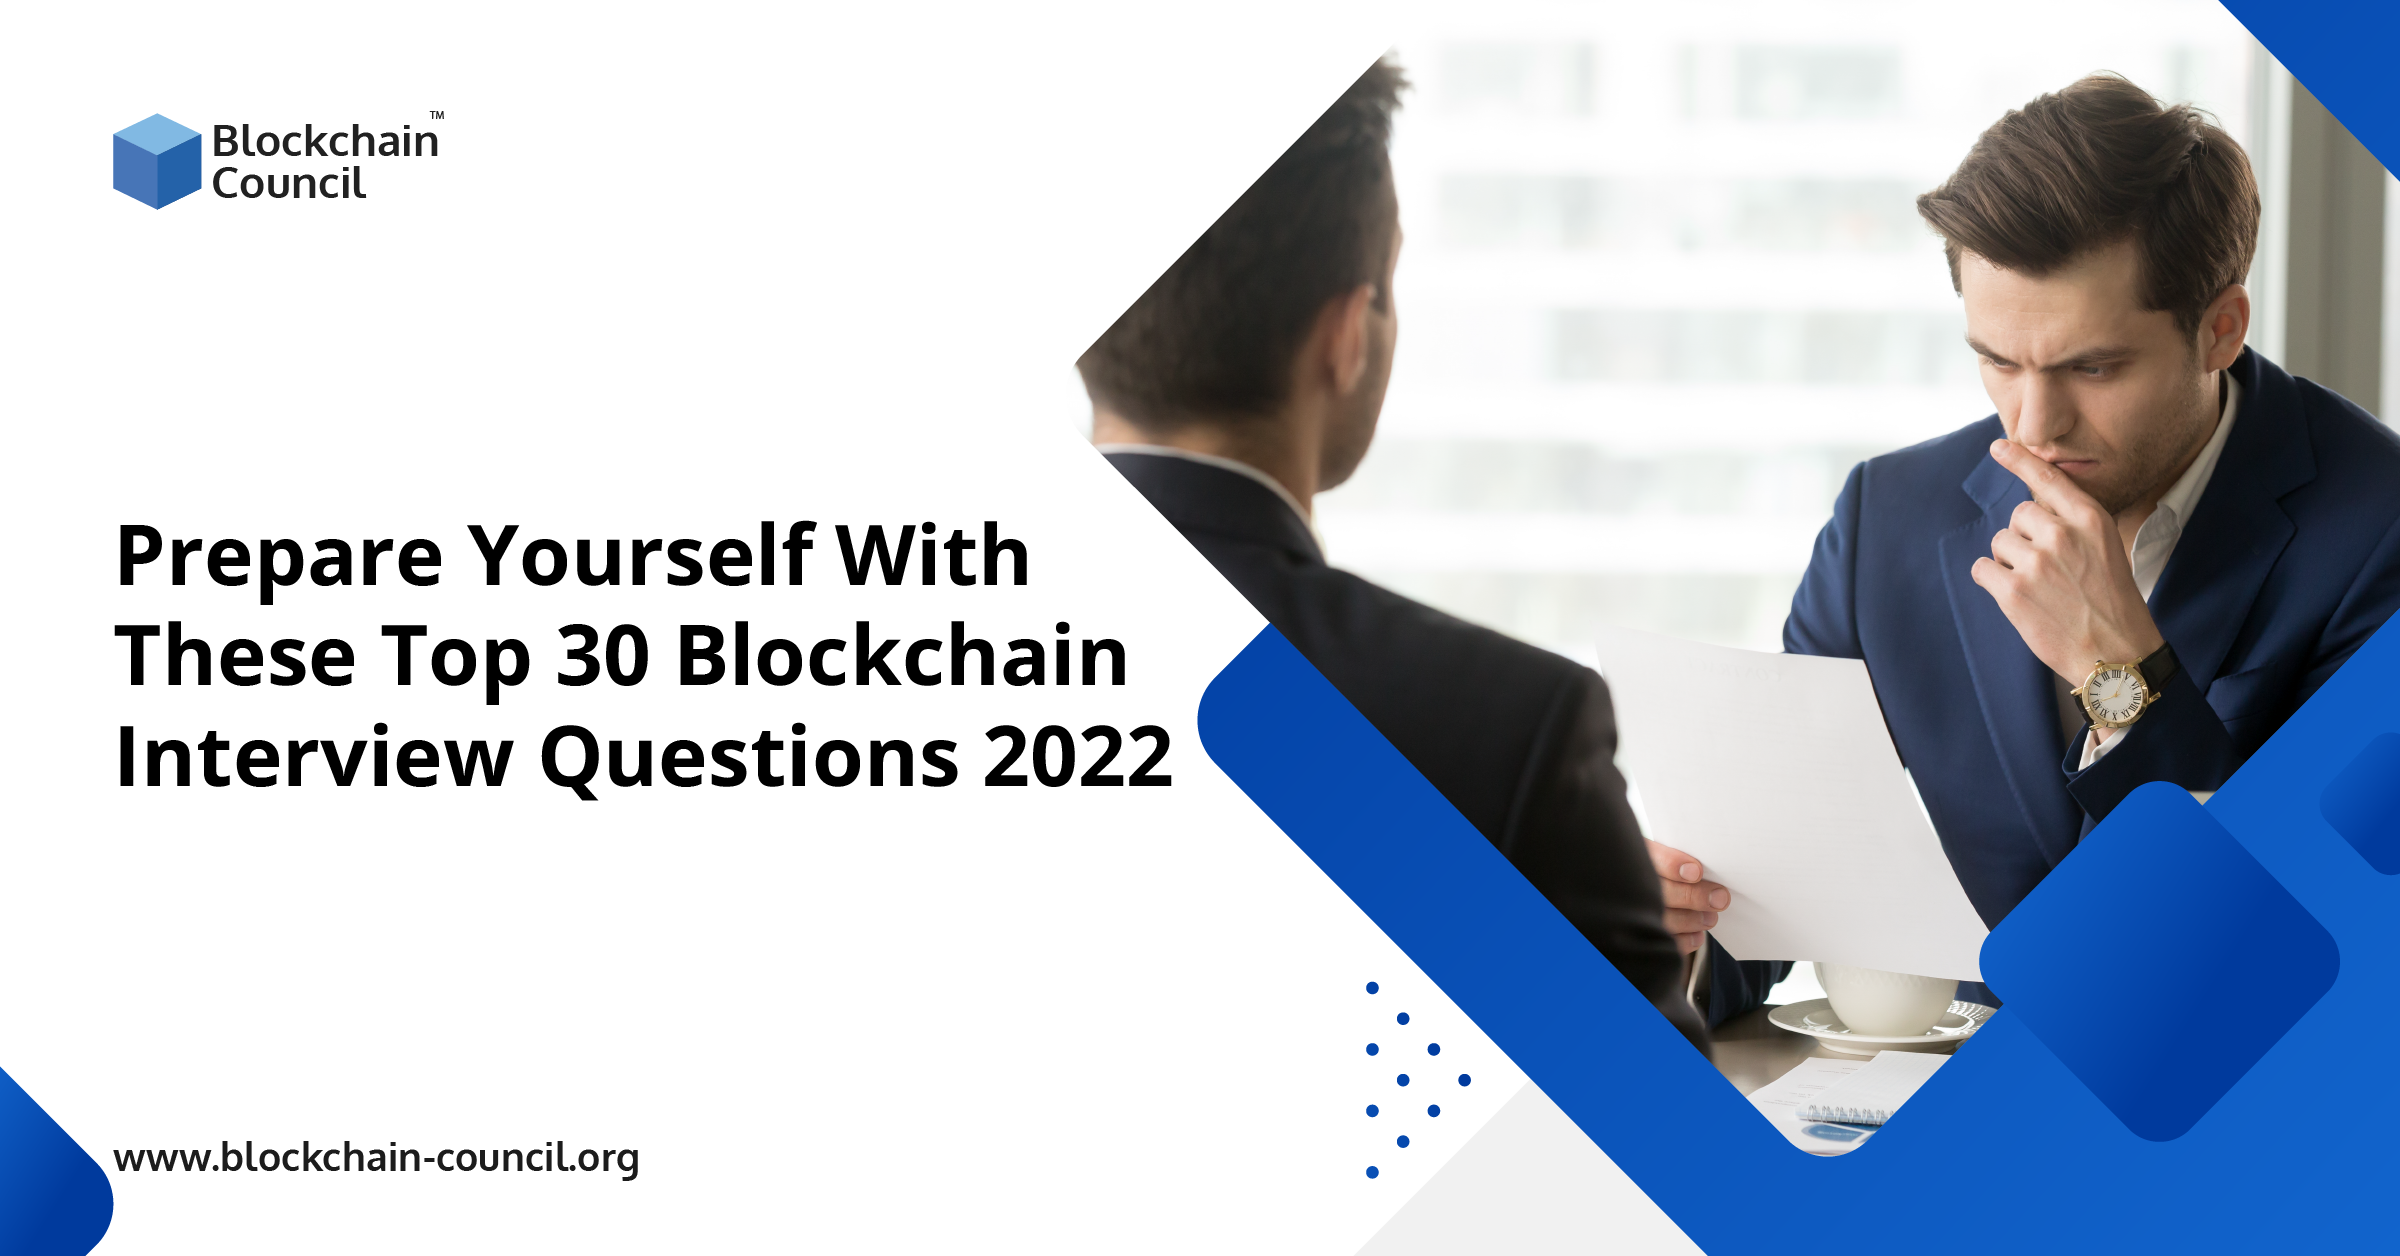 Prepare Yourself With These Top 30 Blockchain Interview Questions 2022